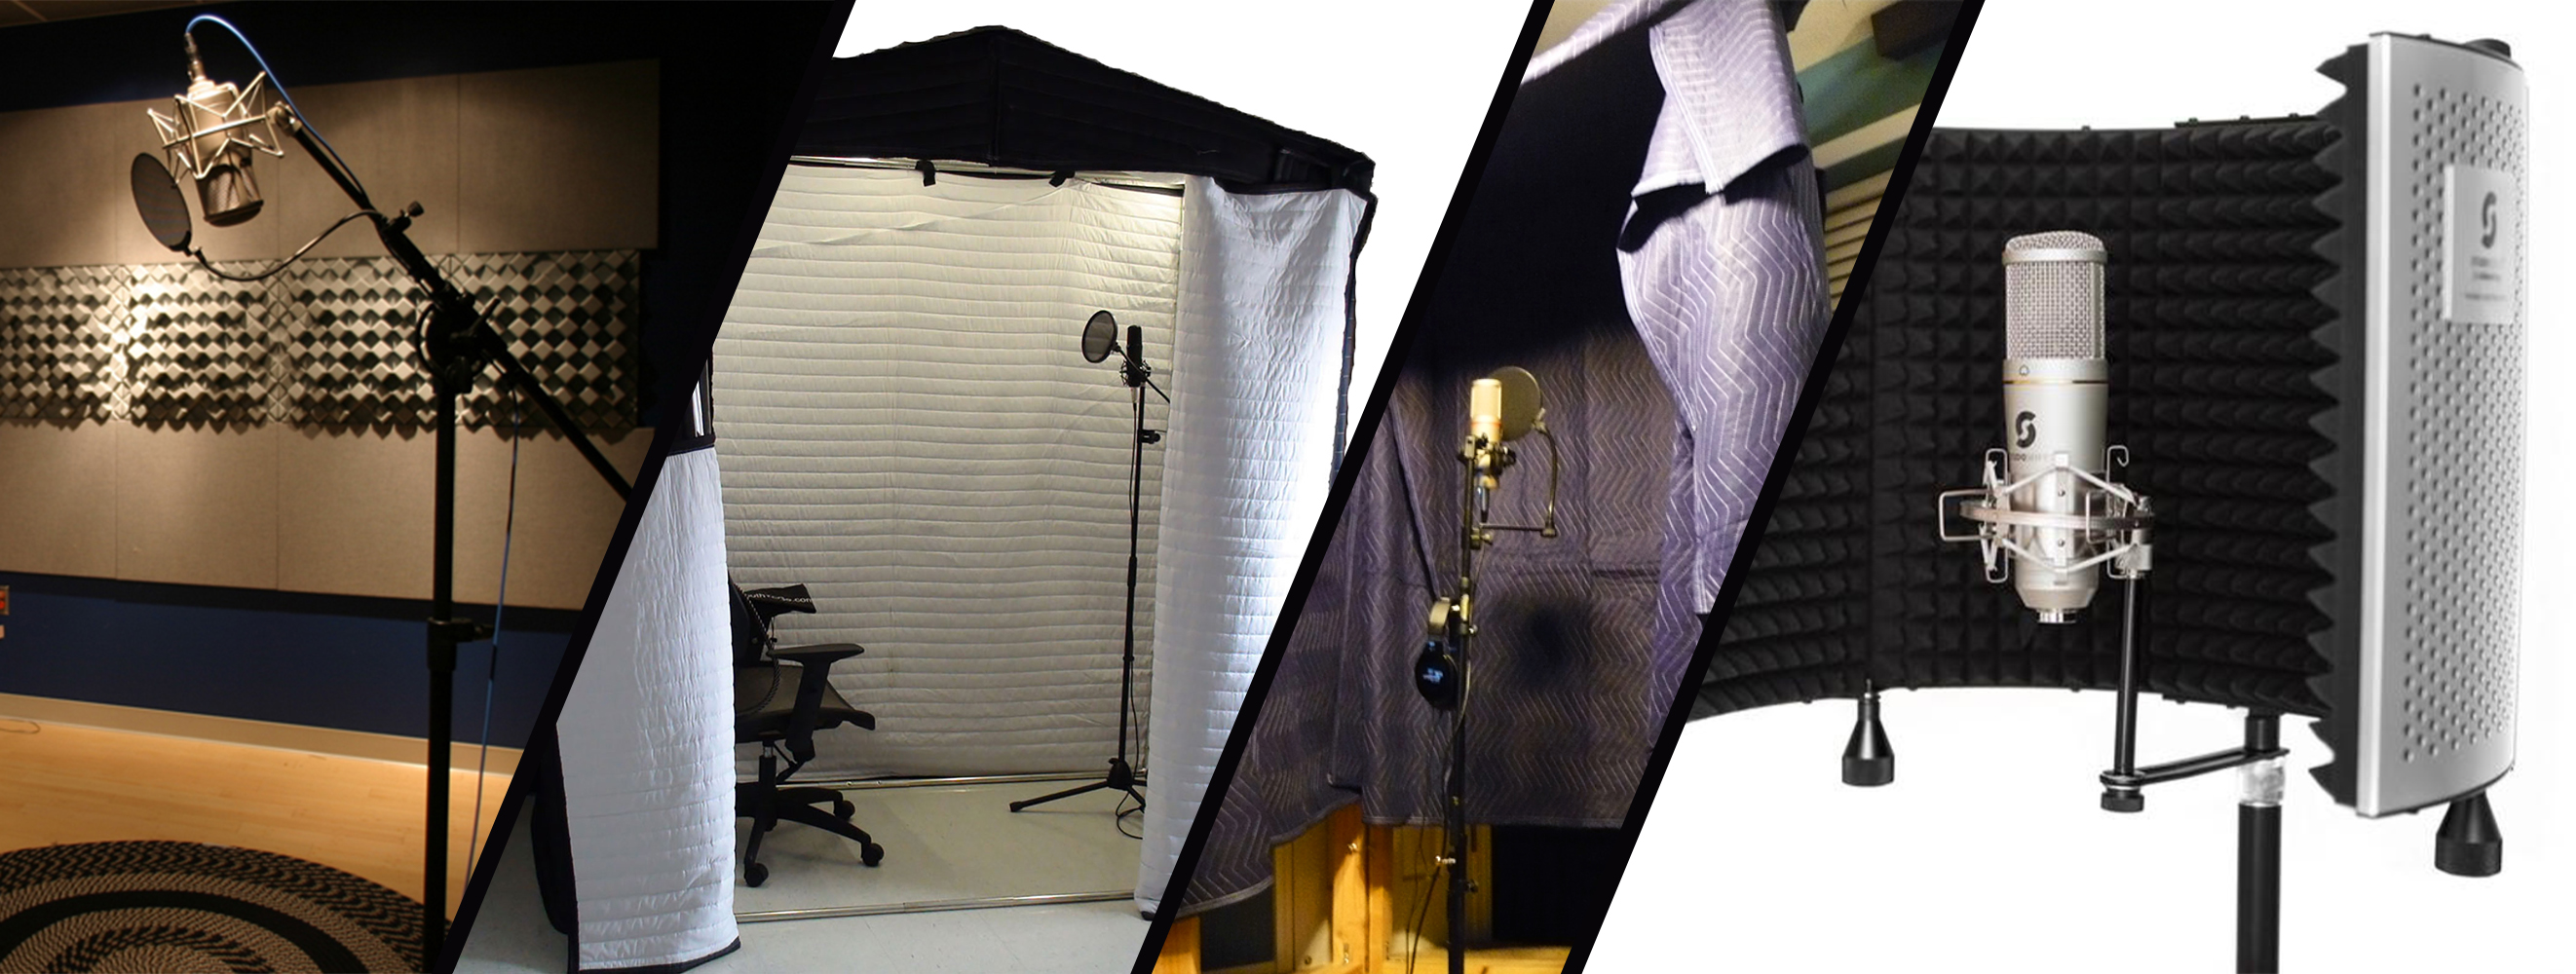 How to build a vocal booth at home